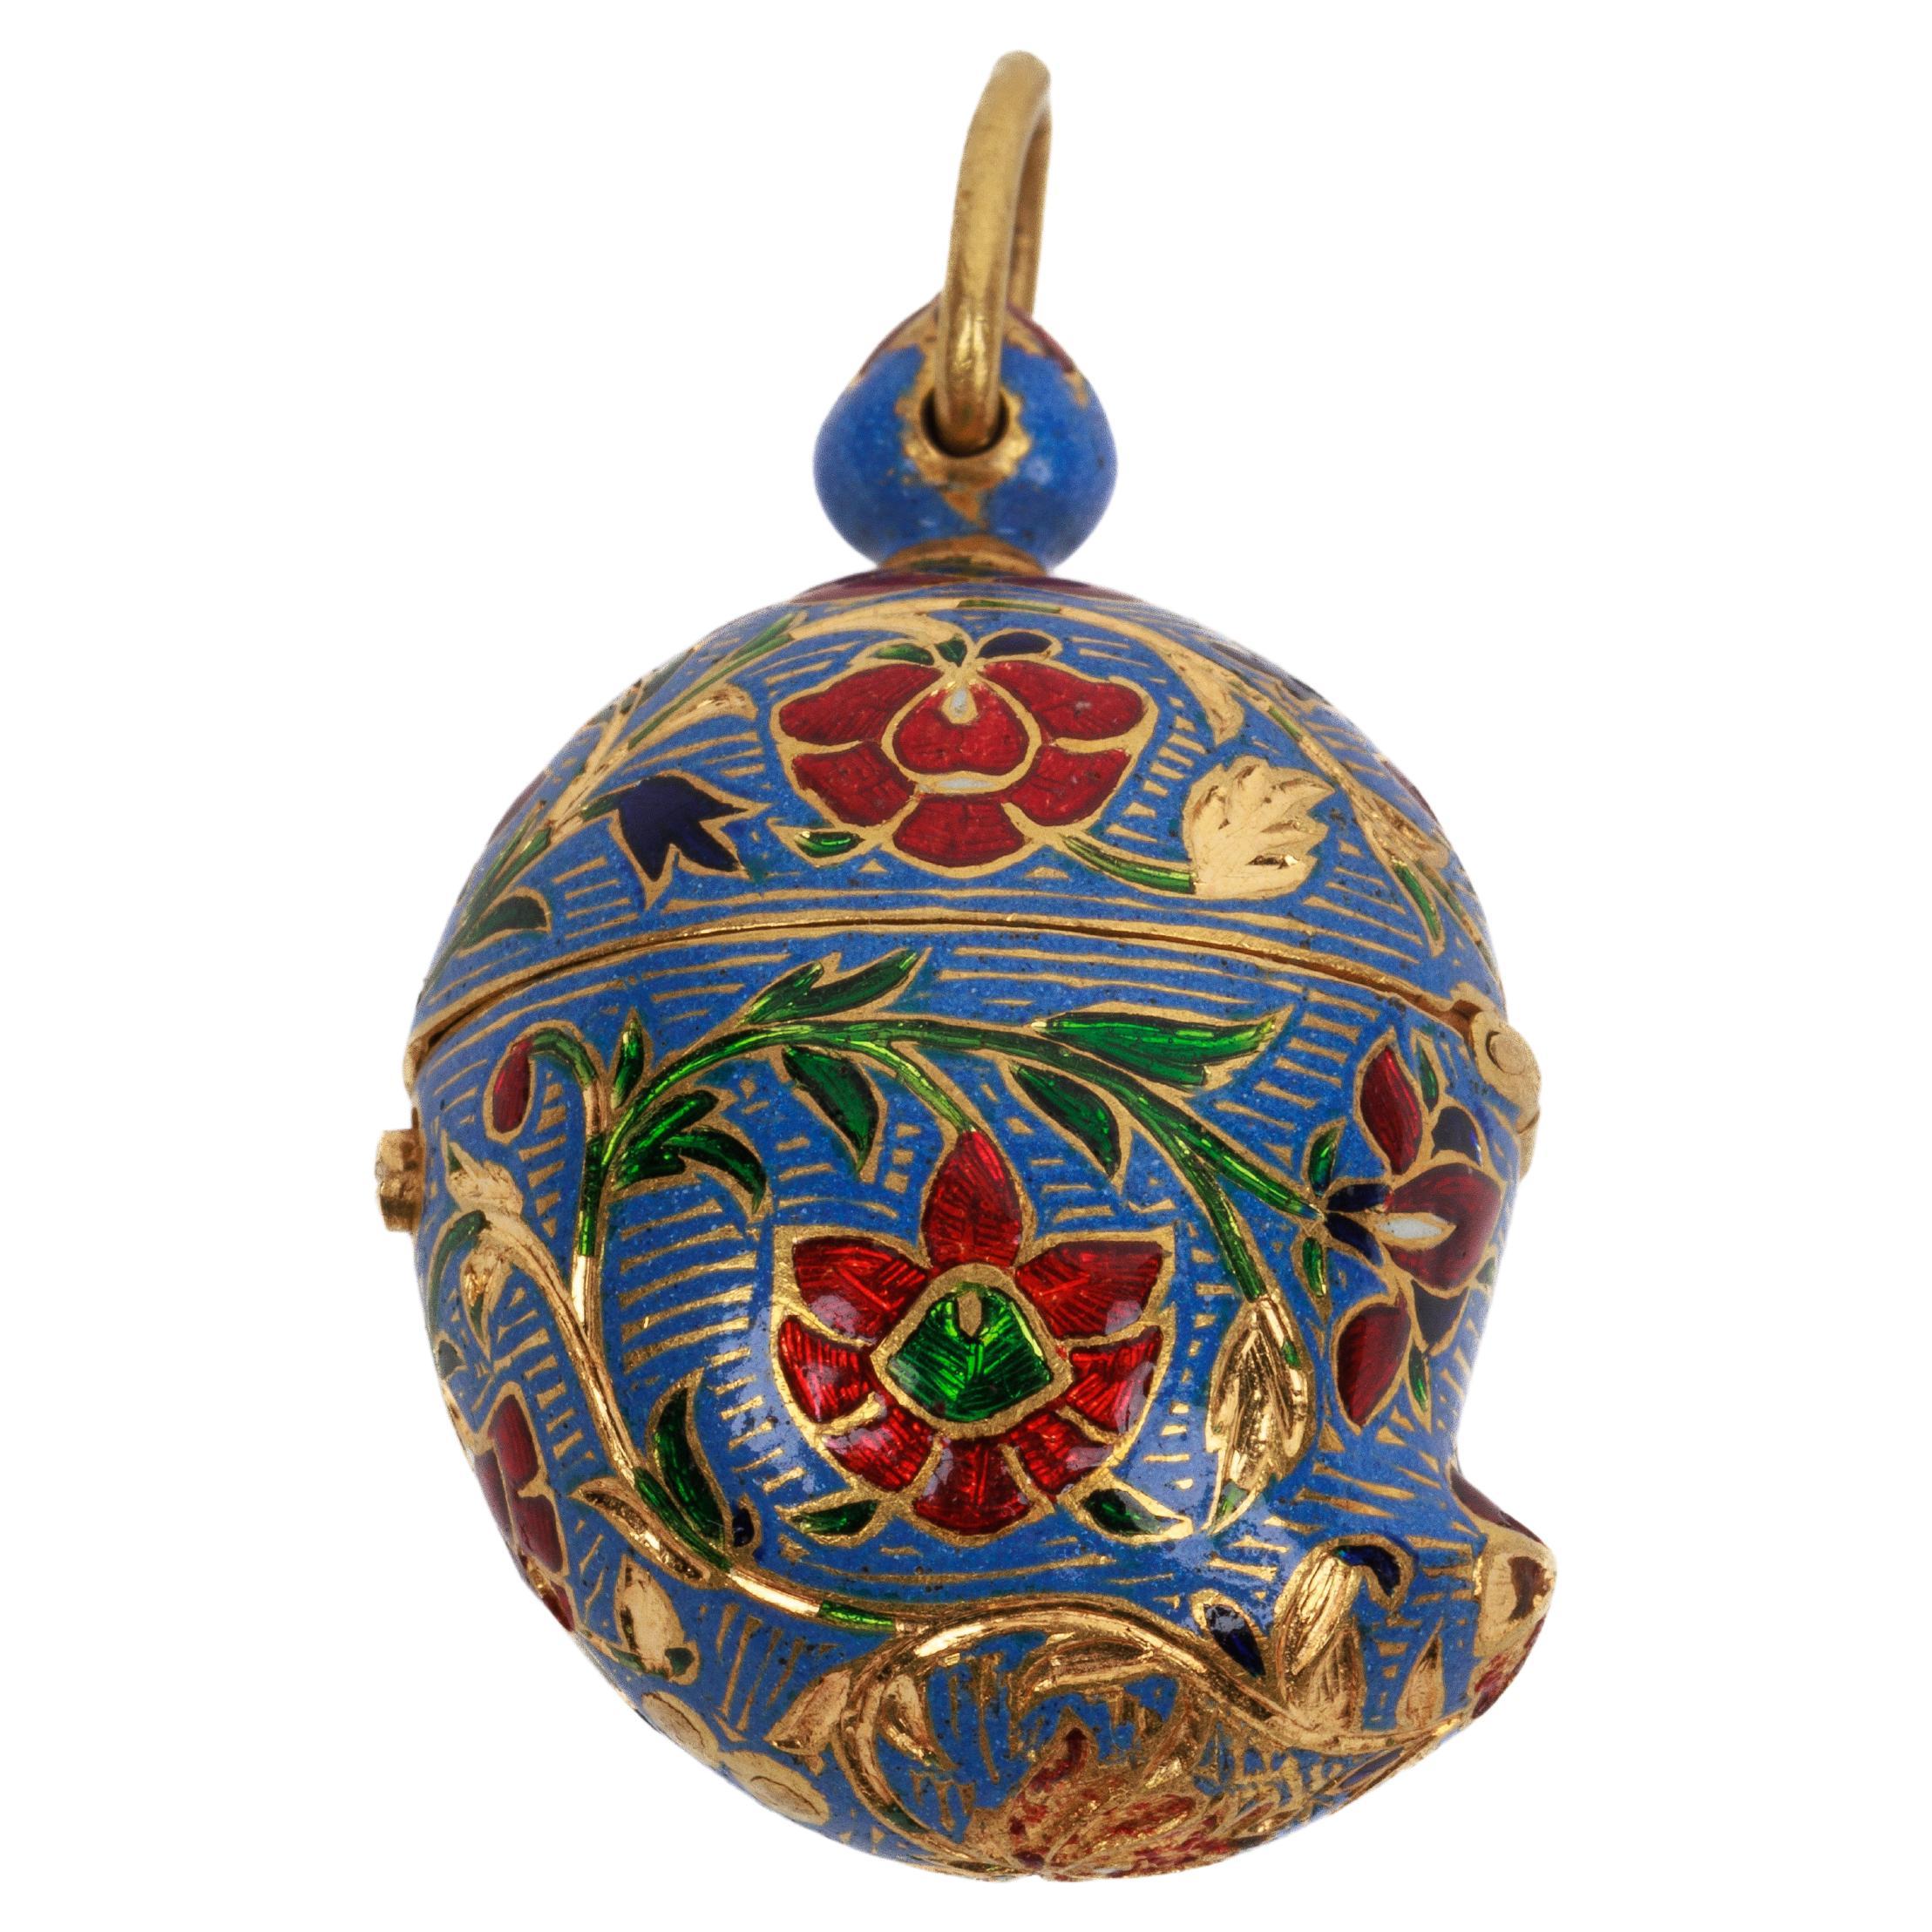 A 22K Indian Gold and Enamel Mango Shaped Pendant, Jaipur, 19th Century.

Finley enameled with green, red, and blue enamel throughout, decorated with flowers on lavender ground. With hinged lid for opening. A unique piece.

This pendant may have